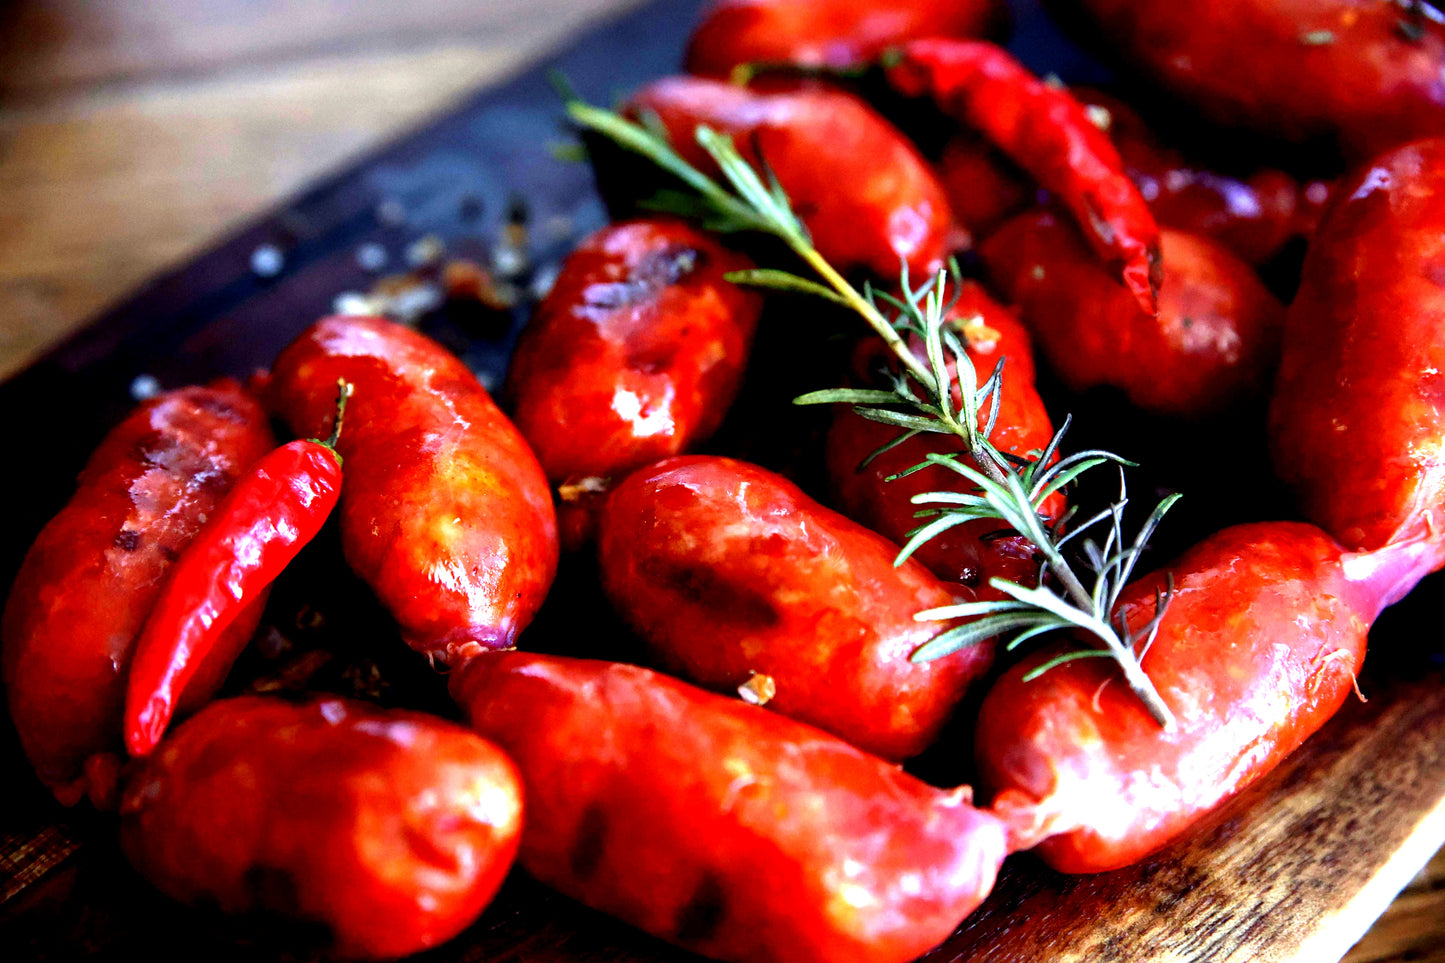 Fresh Spanish Chorizito Choricito Mini Chorizo 24 piece pack approx. 900g packet. Regular price $17.00. [You are guaranteed to receive at least 855g of product, equivalent price of $20.00 per kg.]